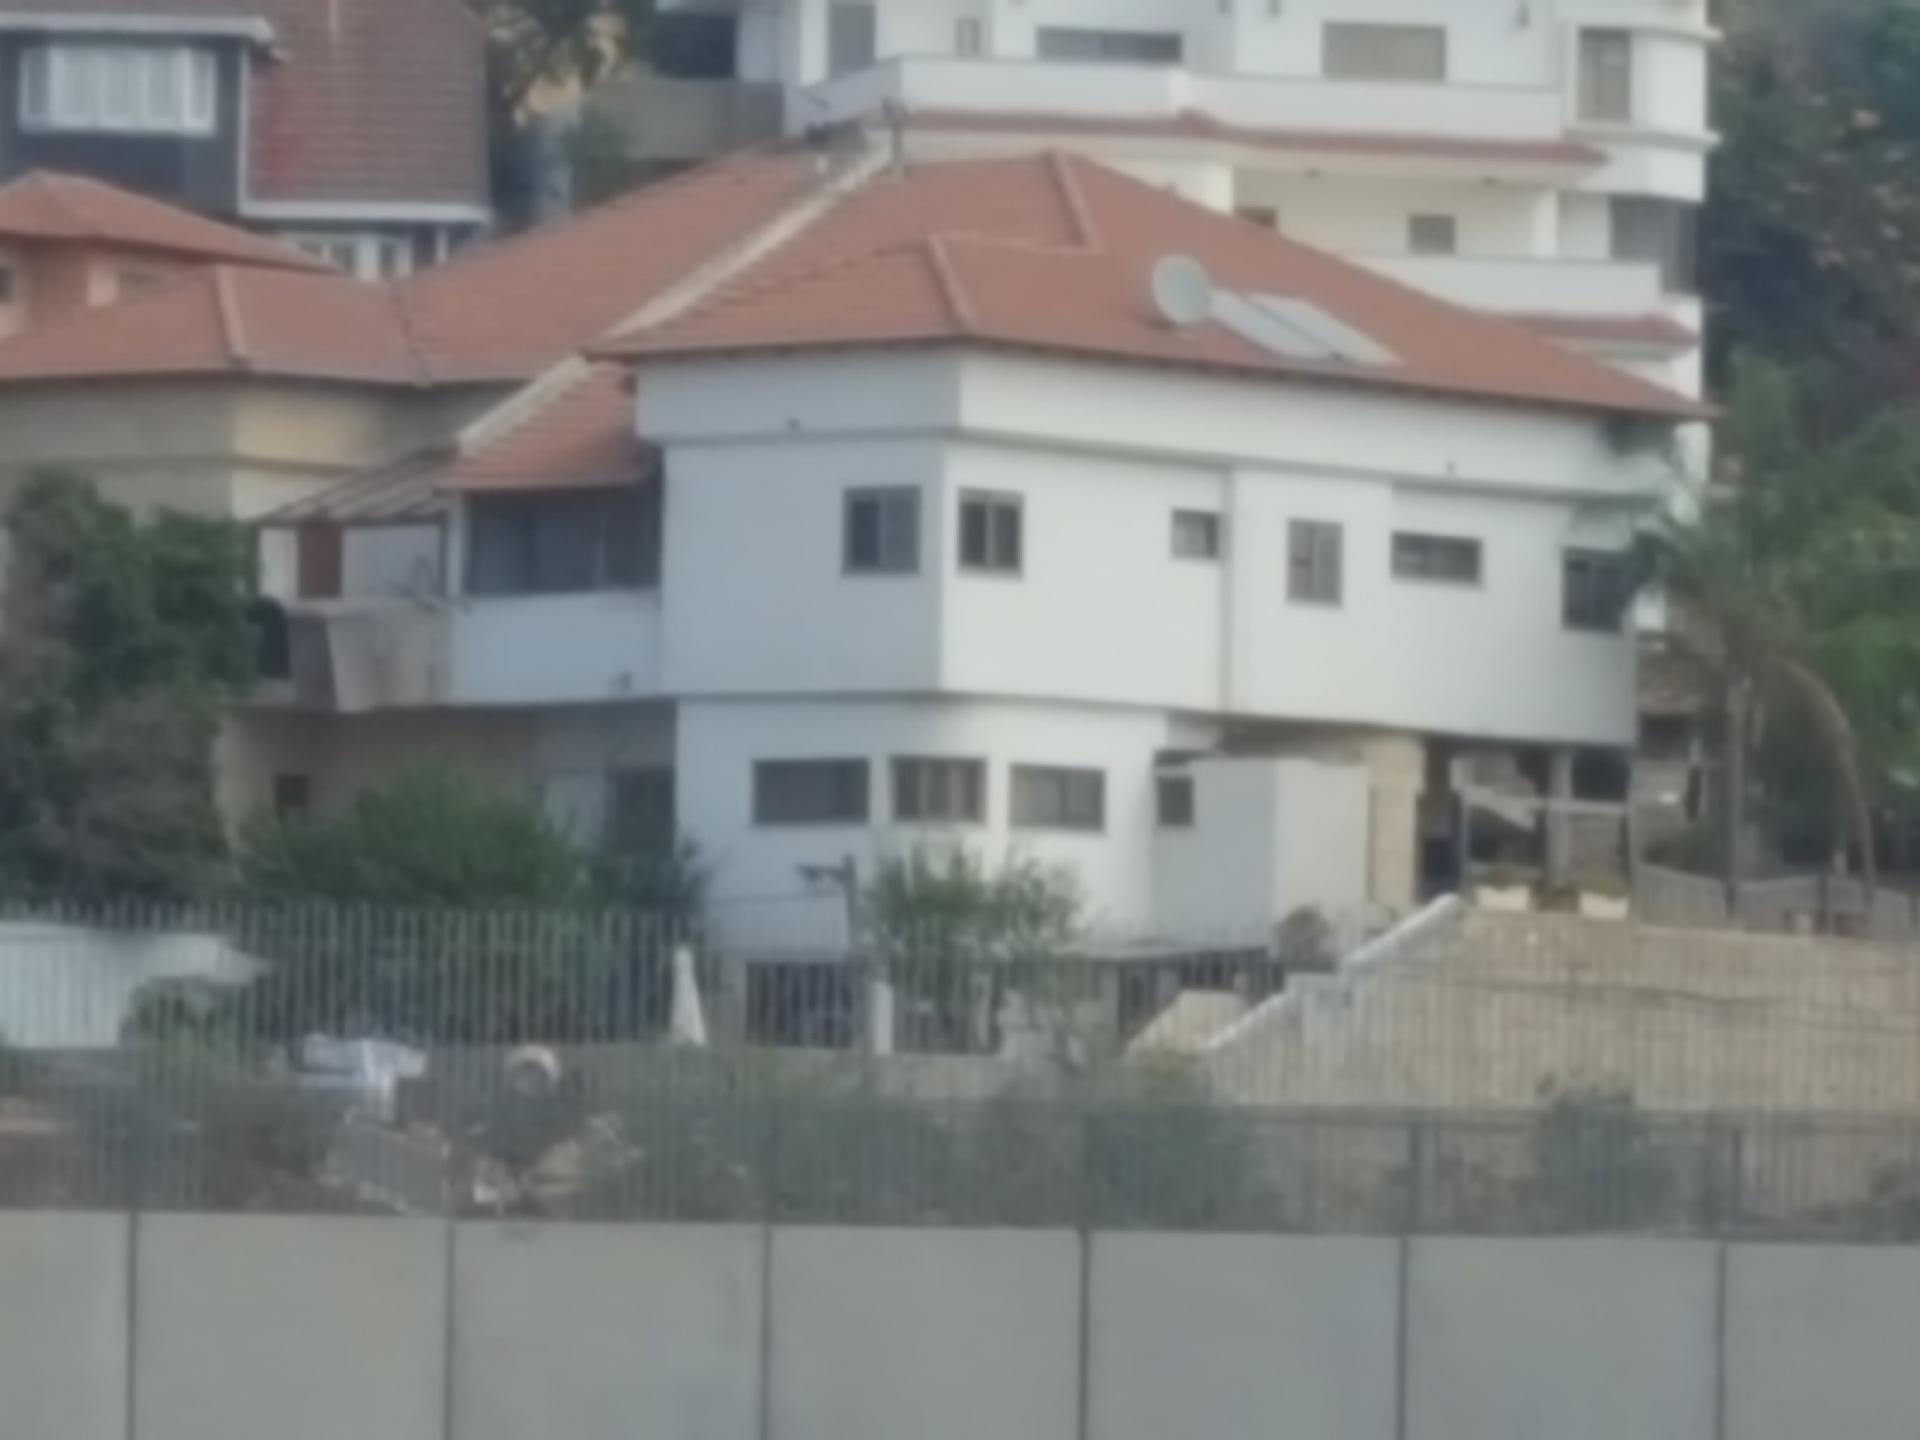 The houses of Sha'arei Tikva are close to the wall